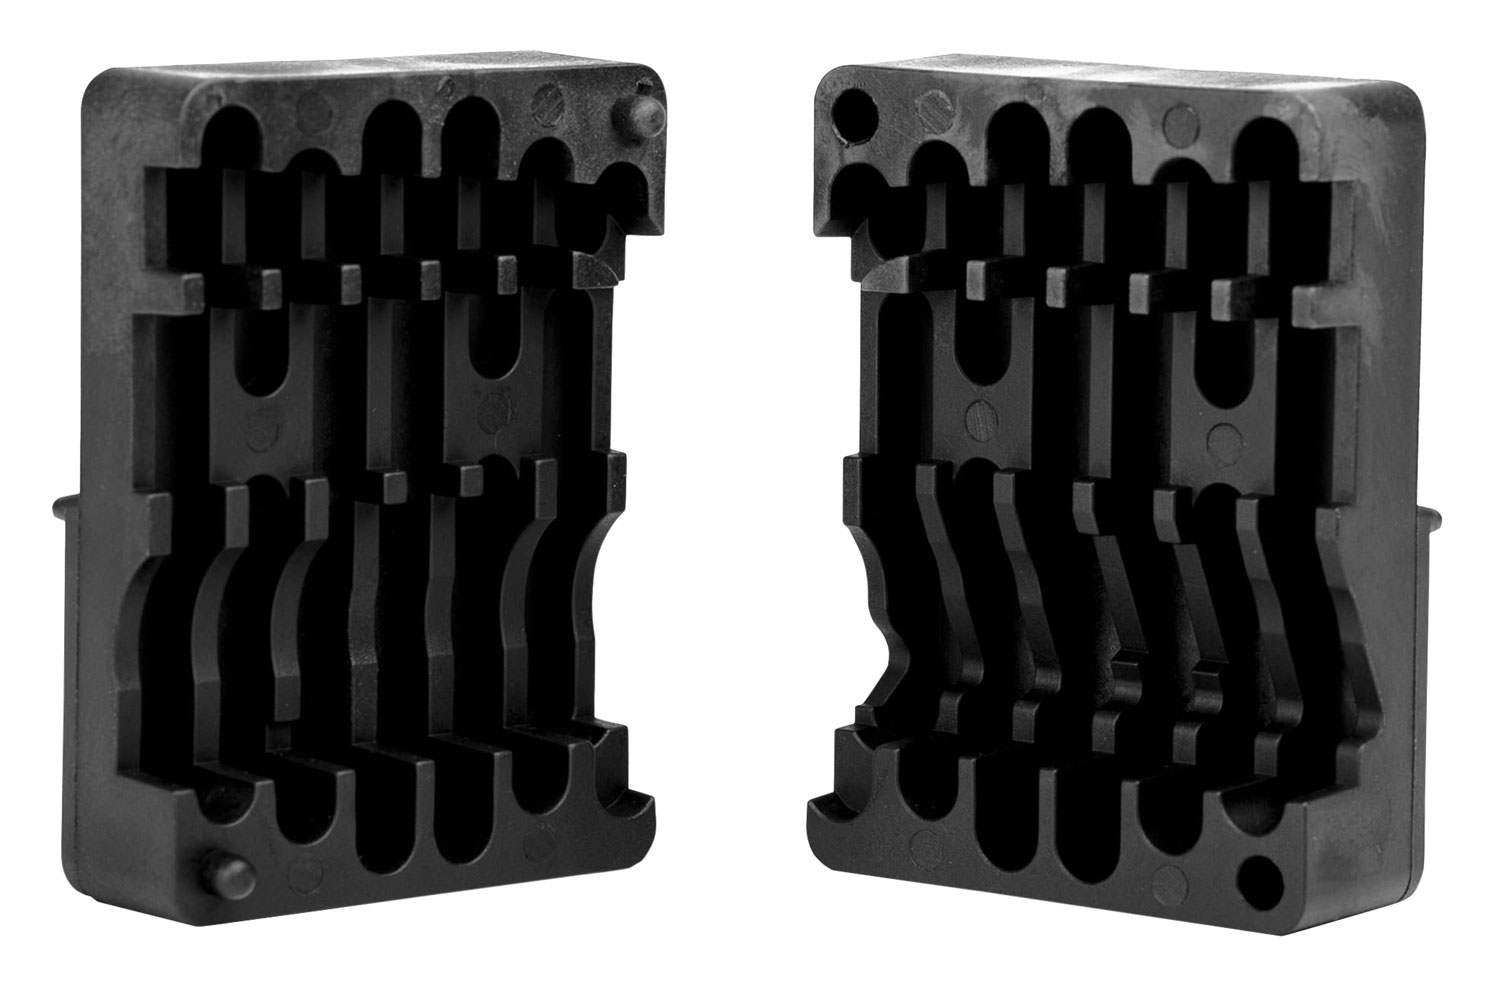 Trinity Force’s AR upper vise block is designed for use with AR s...